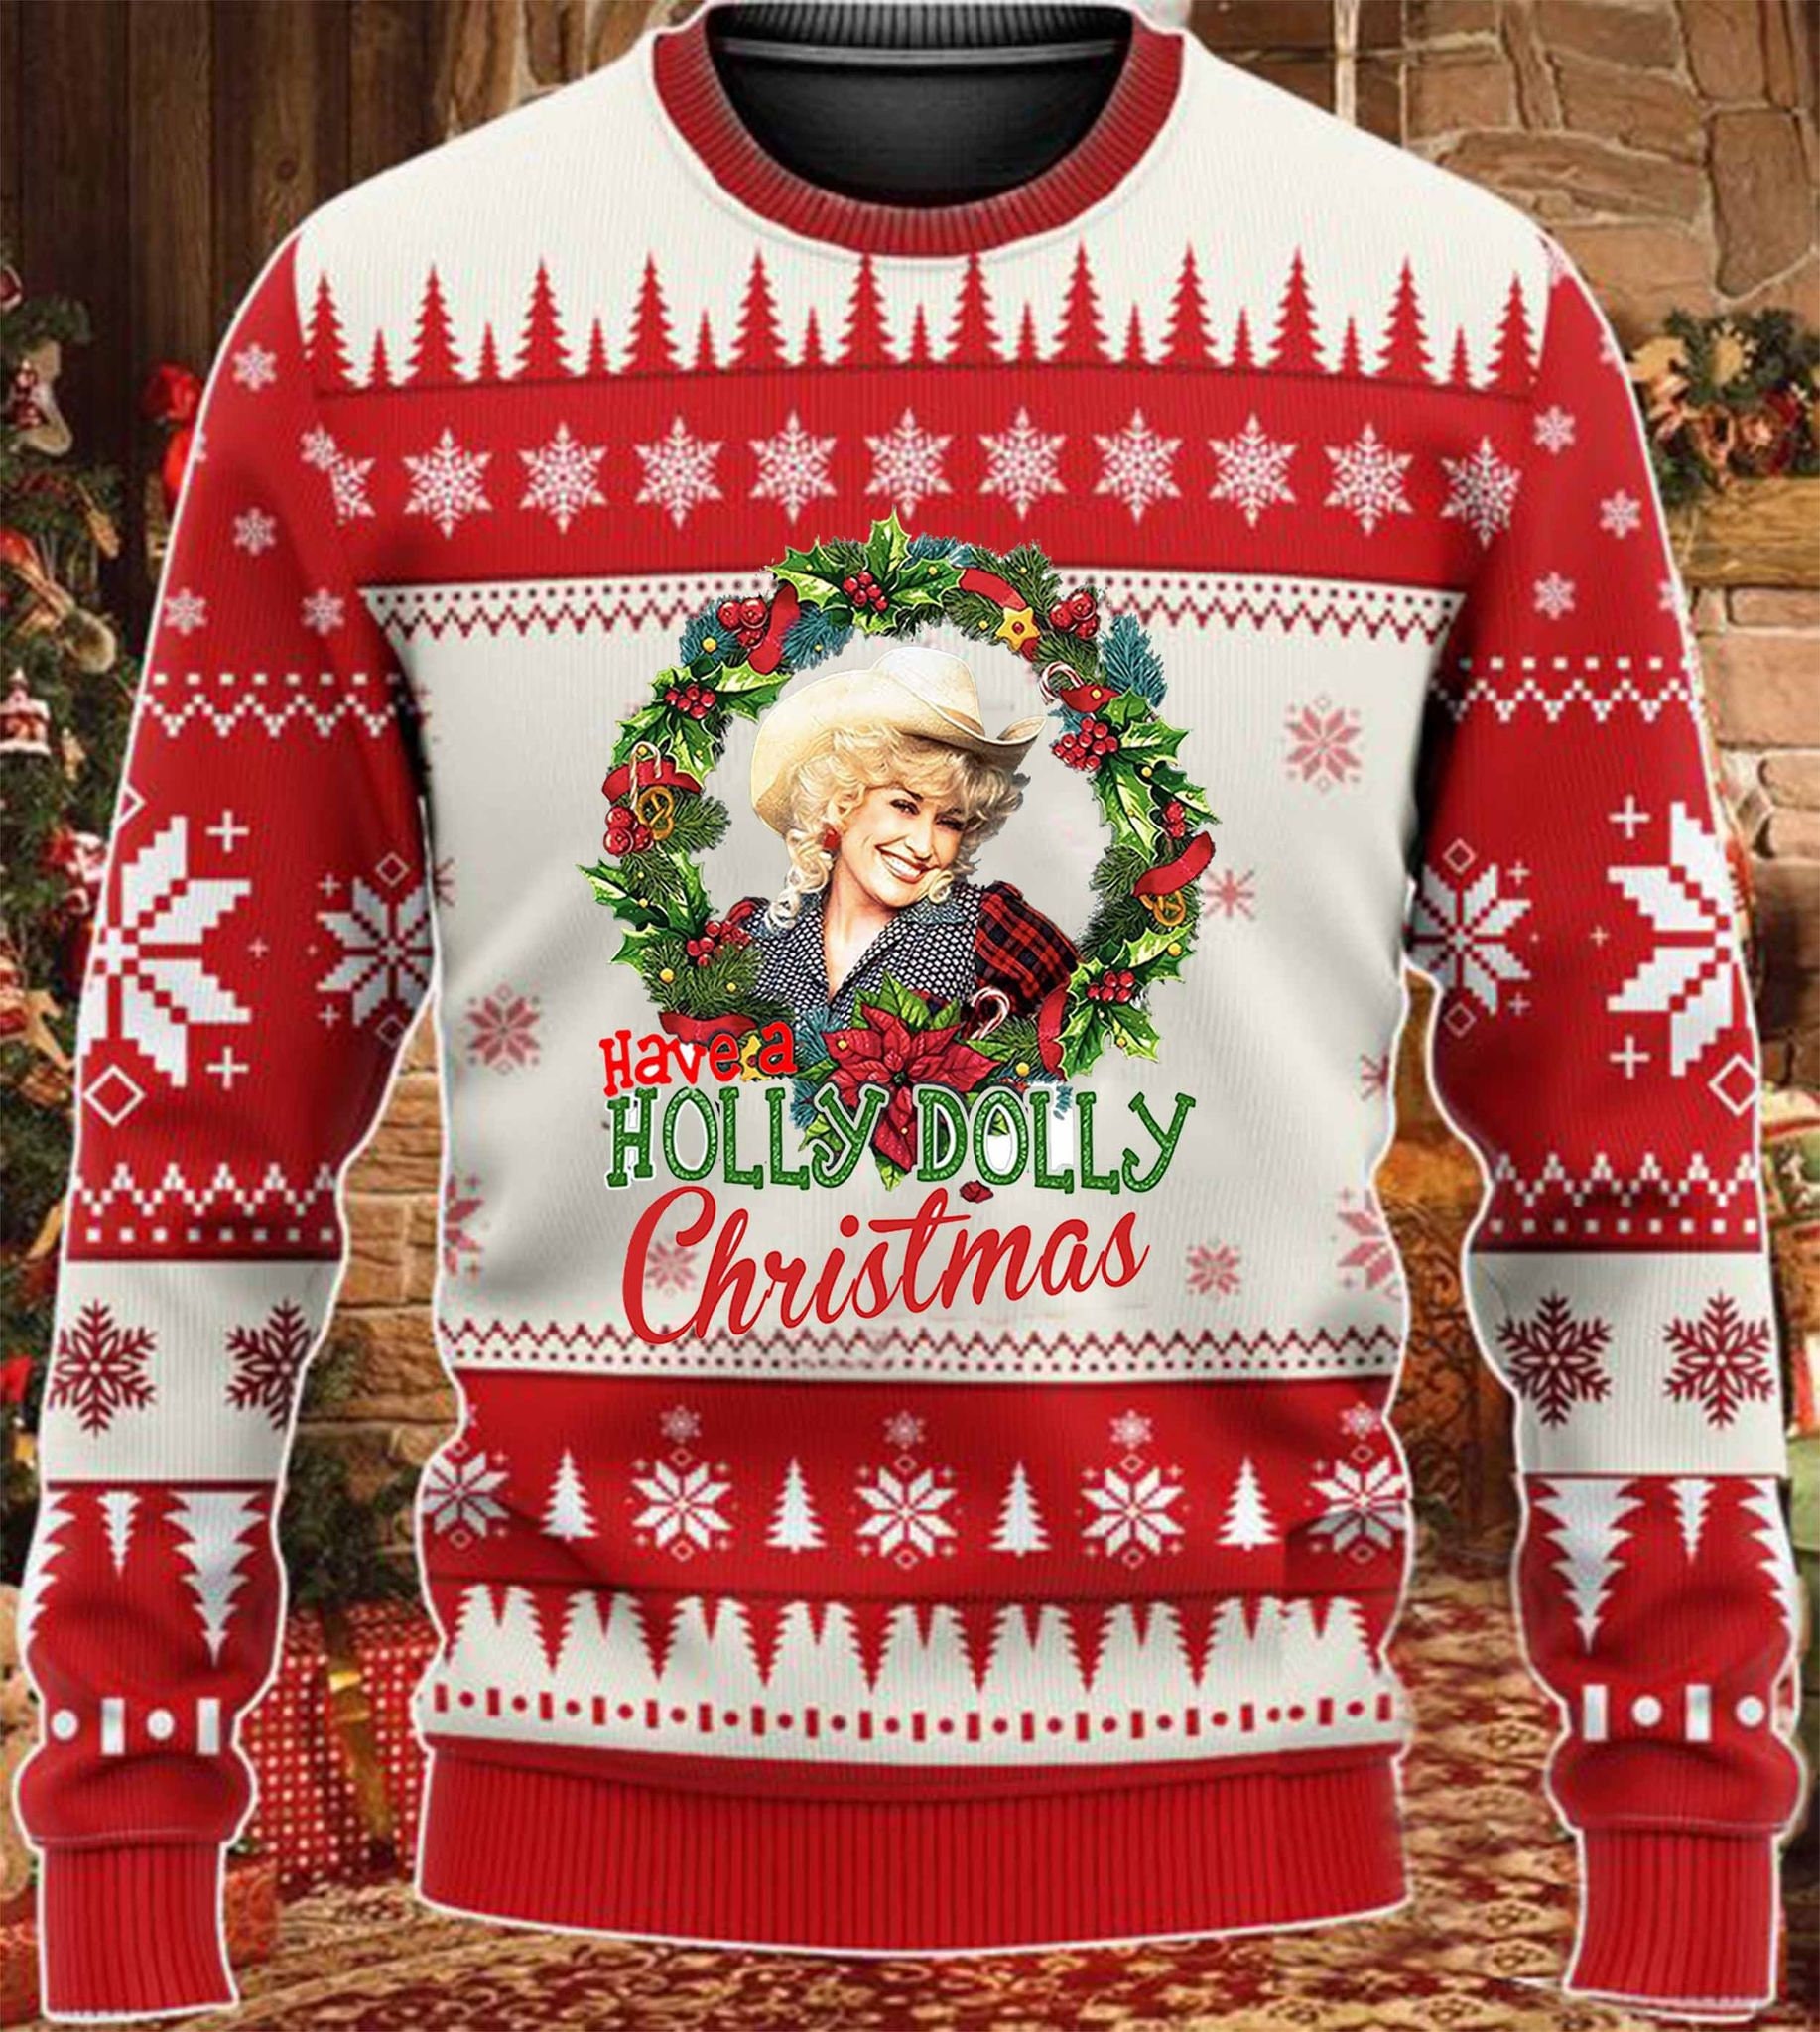 Have A Holly Dolly Christmas Ugly Sweater Sweatshirt For Fans